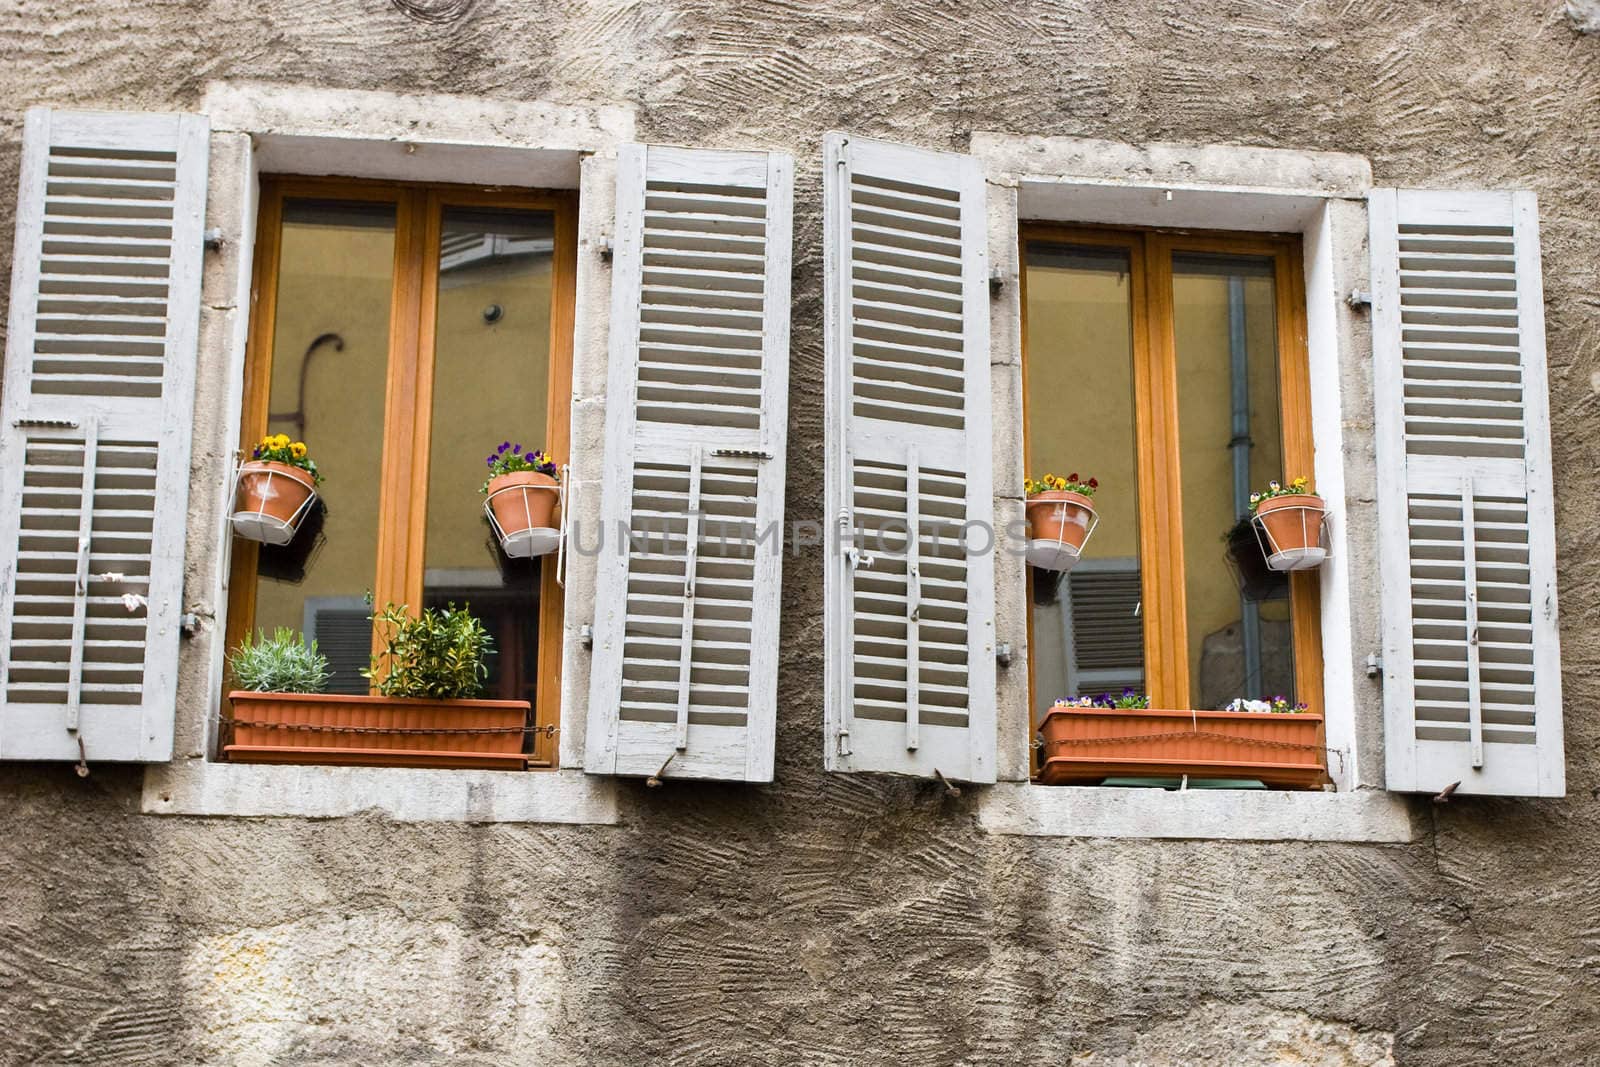 Shuttered windows at medieval town of Annecy, France